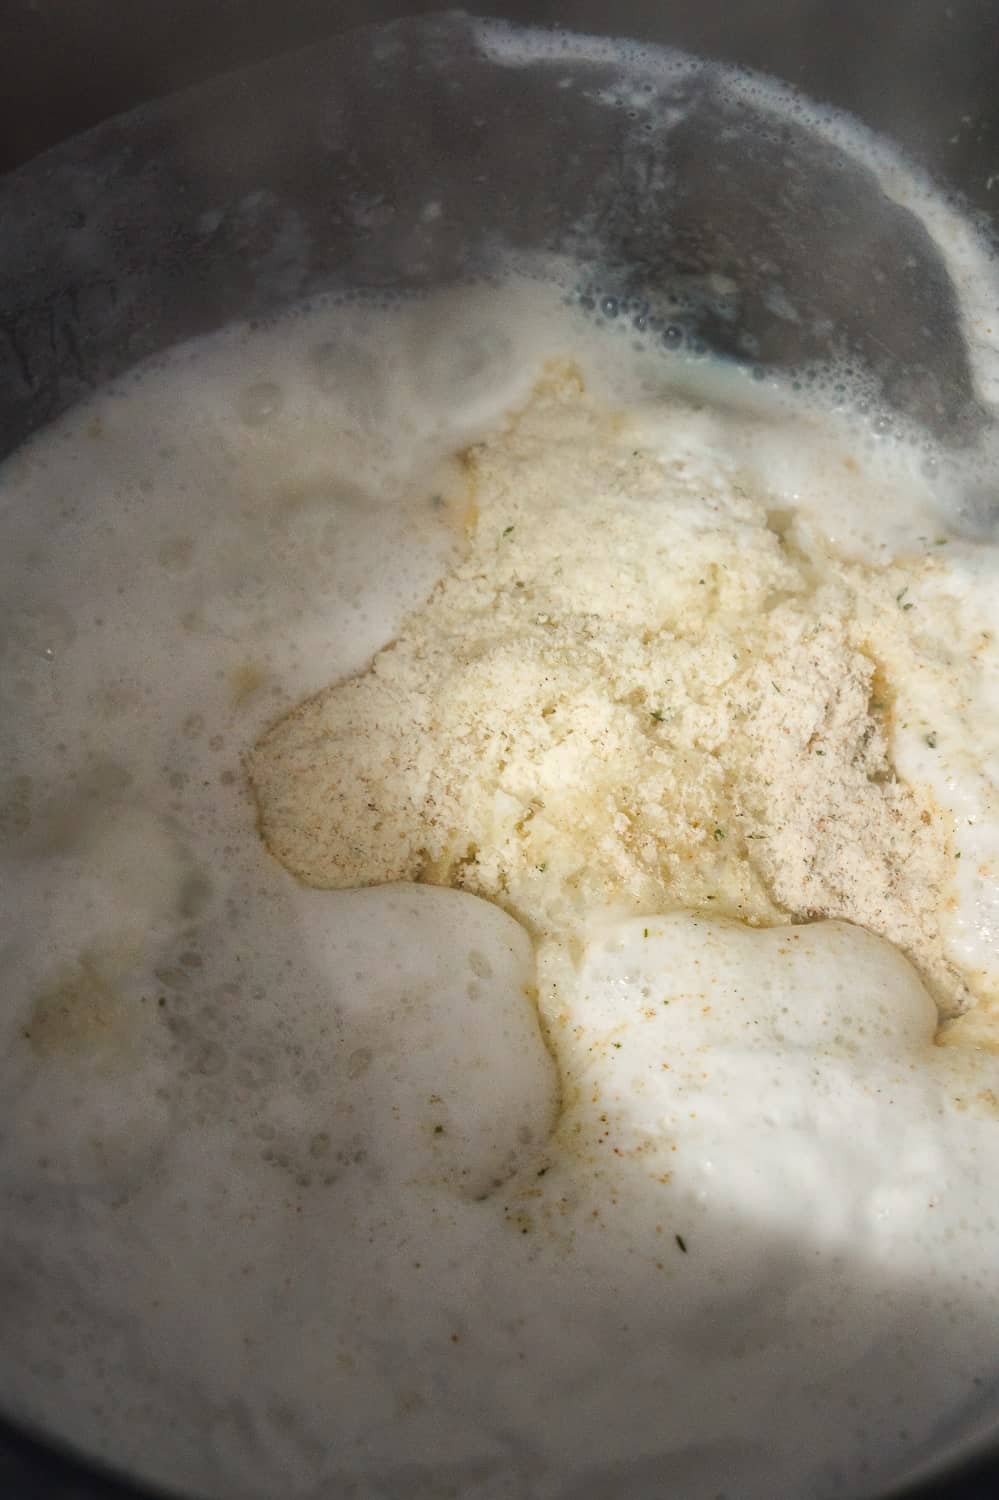 powdered mashed potatoes being added to boiling milk